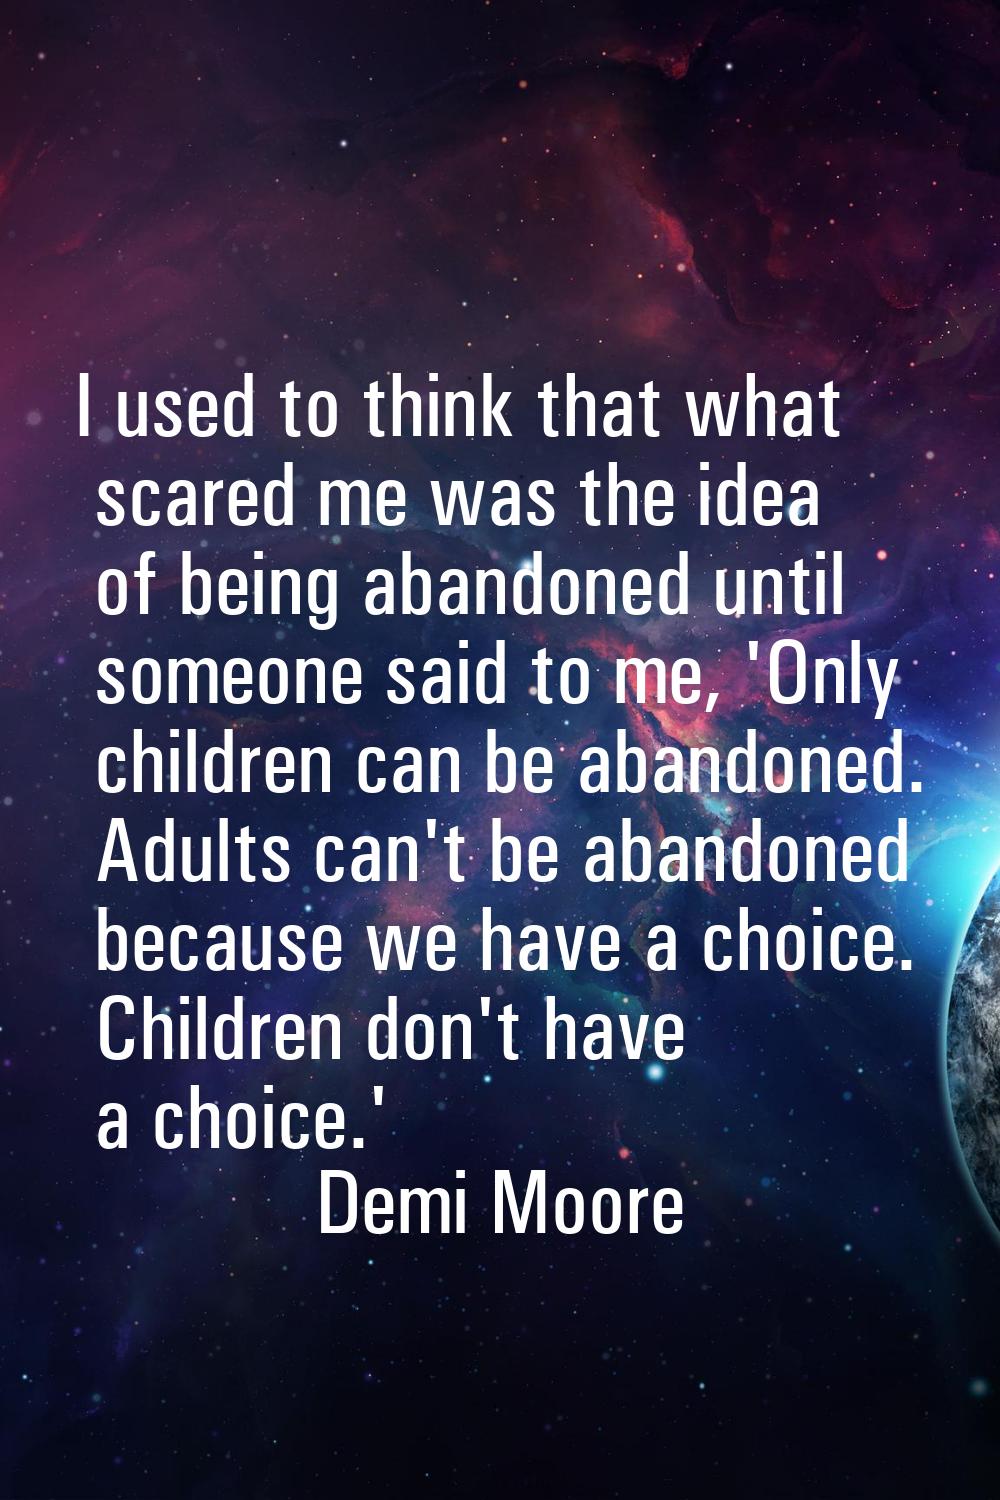 I used to think that what scared me was the idea of being abandoned until someone said to me, 'Only